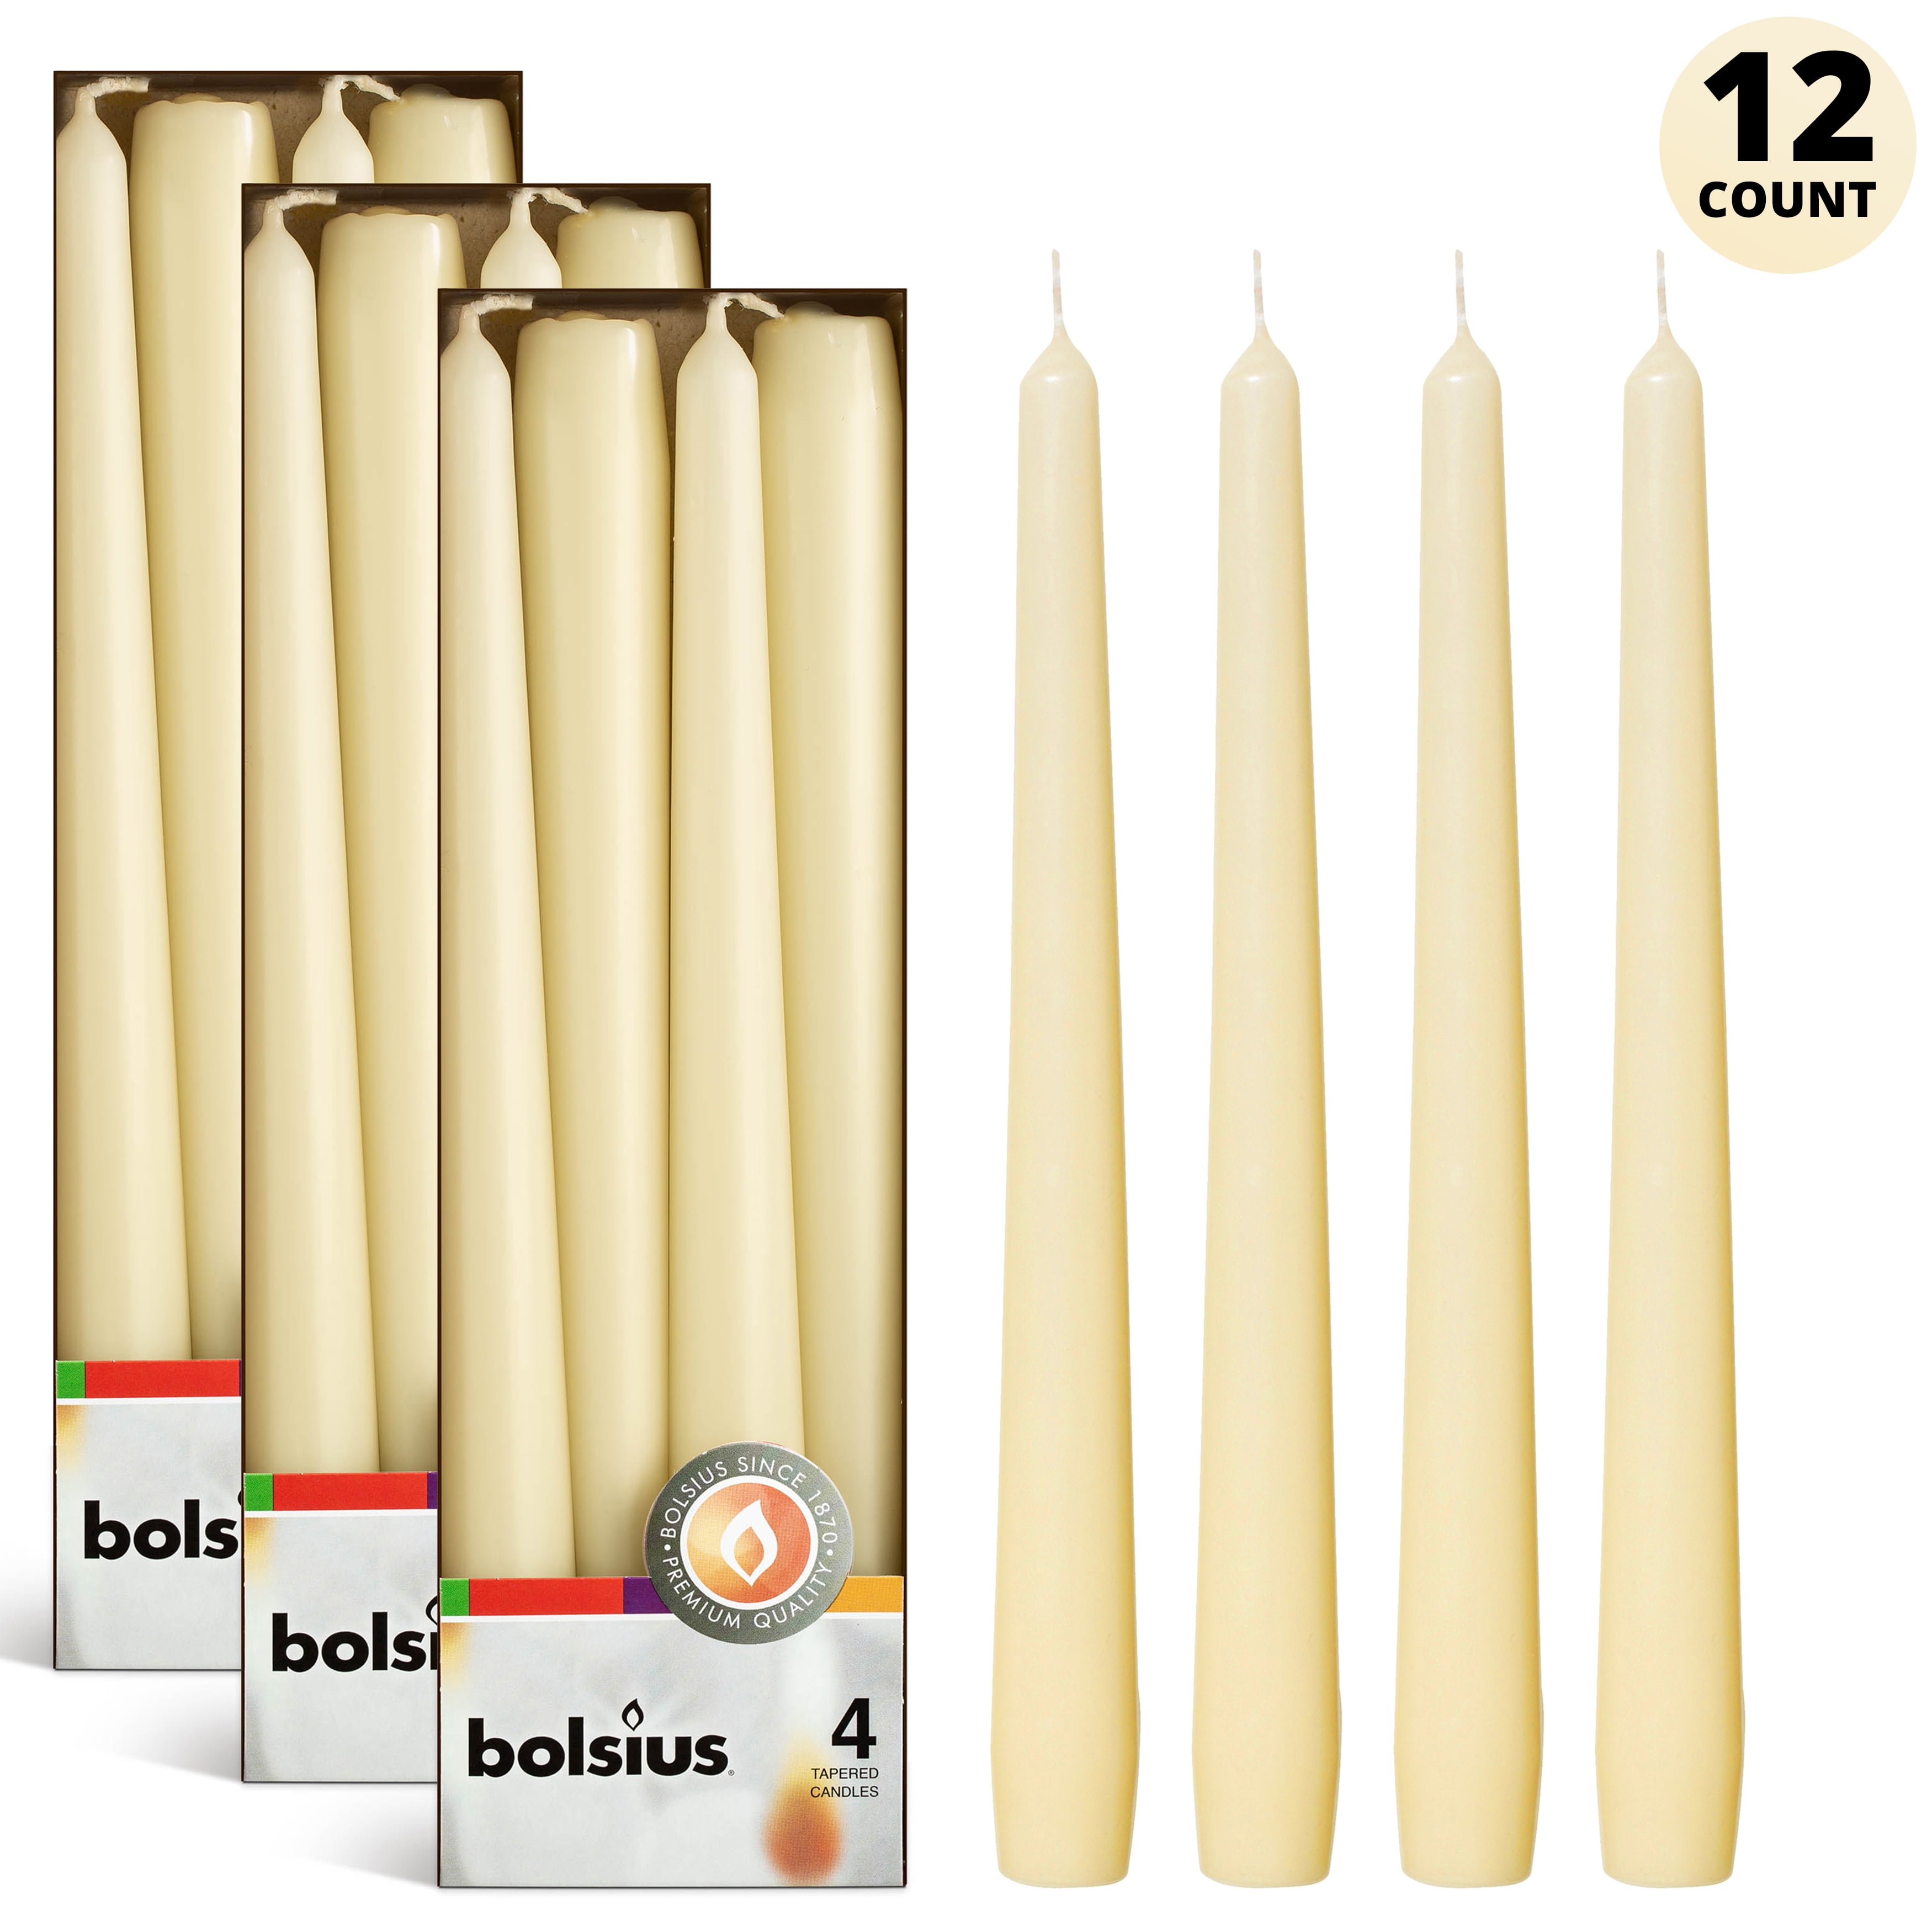 12 Cotton Wicks Hand Poured 8" Round 100% Beeswax Taper Candles All-Natural 